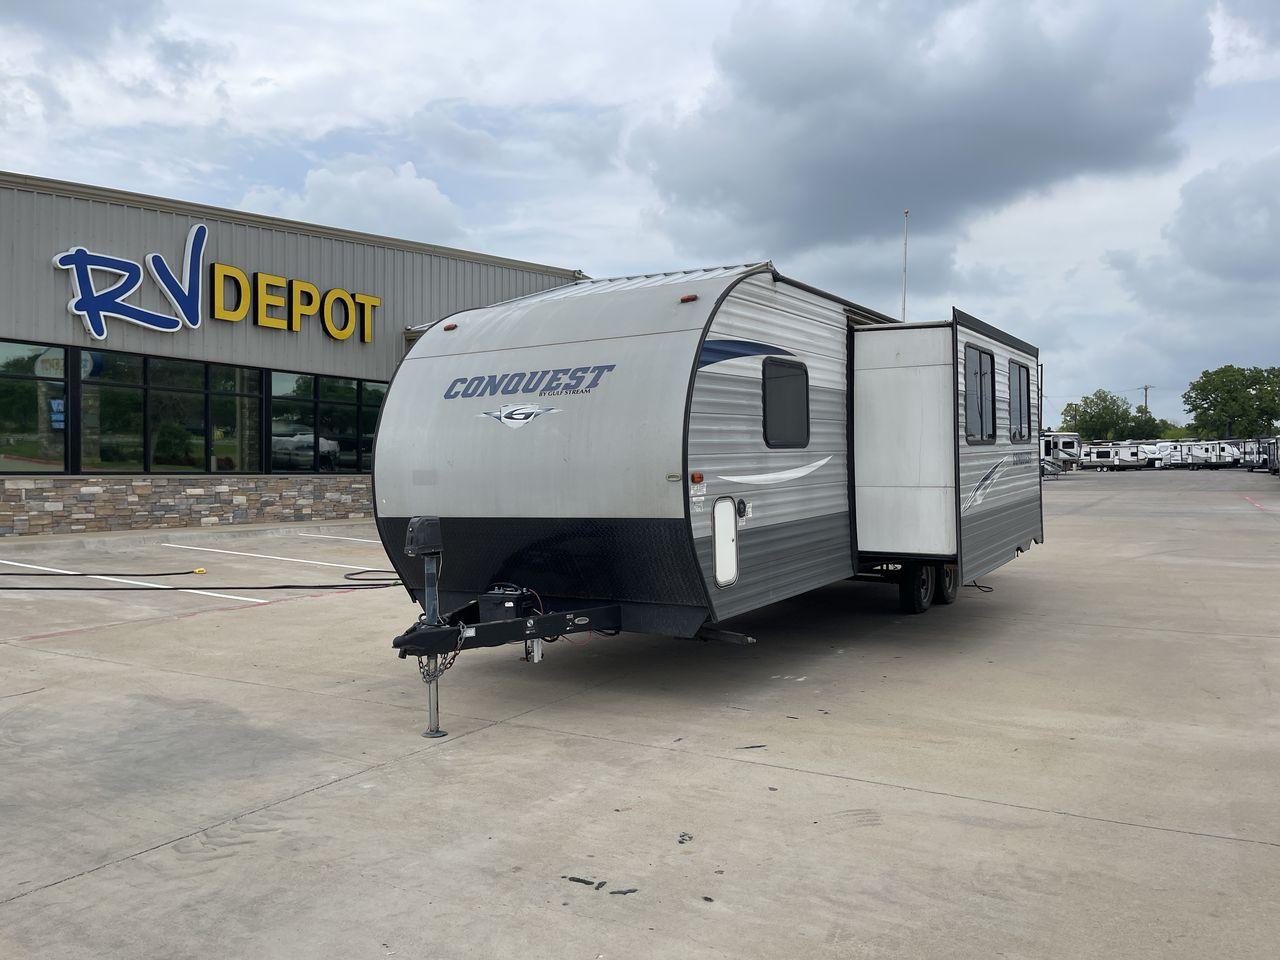 2019 GULF STREAM CONQUEST 274QB (1NL1G3226K1) , Length: 32.25 ft. | Dry Weight: 6,230 lbs. | Slides: 1 transmission, located at 4319 N Main St, Cleburne, TX, 76033, (817) 678-5133, 32.385960, -97.391212 - The 2019 Gulf Stream 274QB is a dual-axle steel-wheel set-up that measures 32.25 ft. in length. It has a dry weight of 6,230 lbs. and a payload capacity of 1,918 lbs. It has automatic heating and cooling rated at 16,000 and 13,500 BTUs, respectively. It is also equipped with one power slide and a po - Photo #0